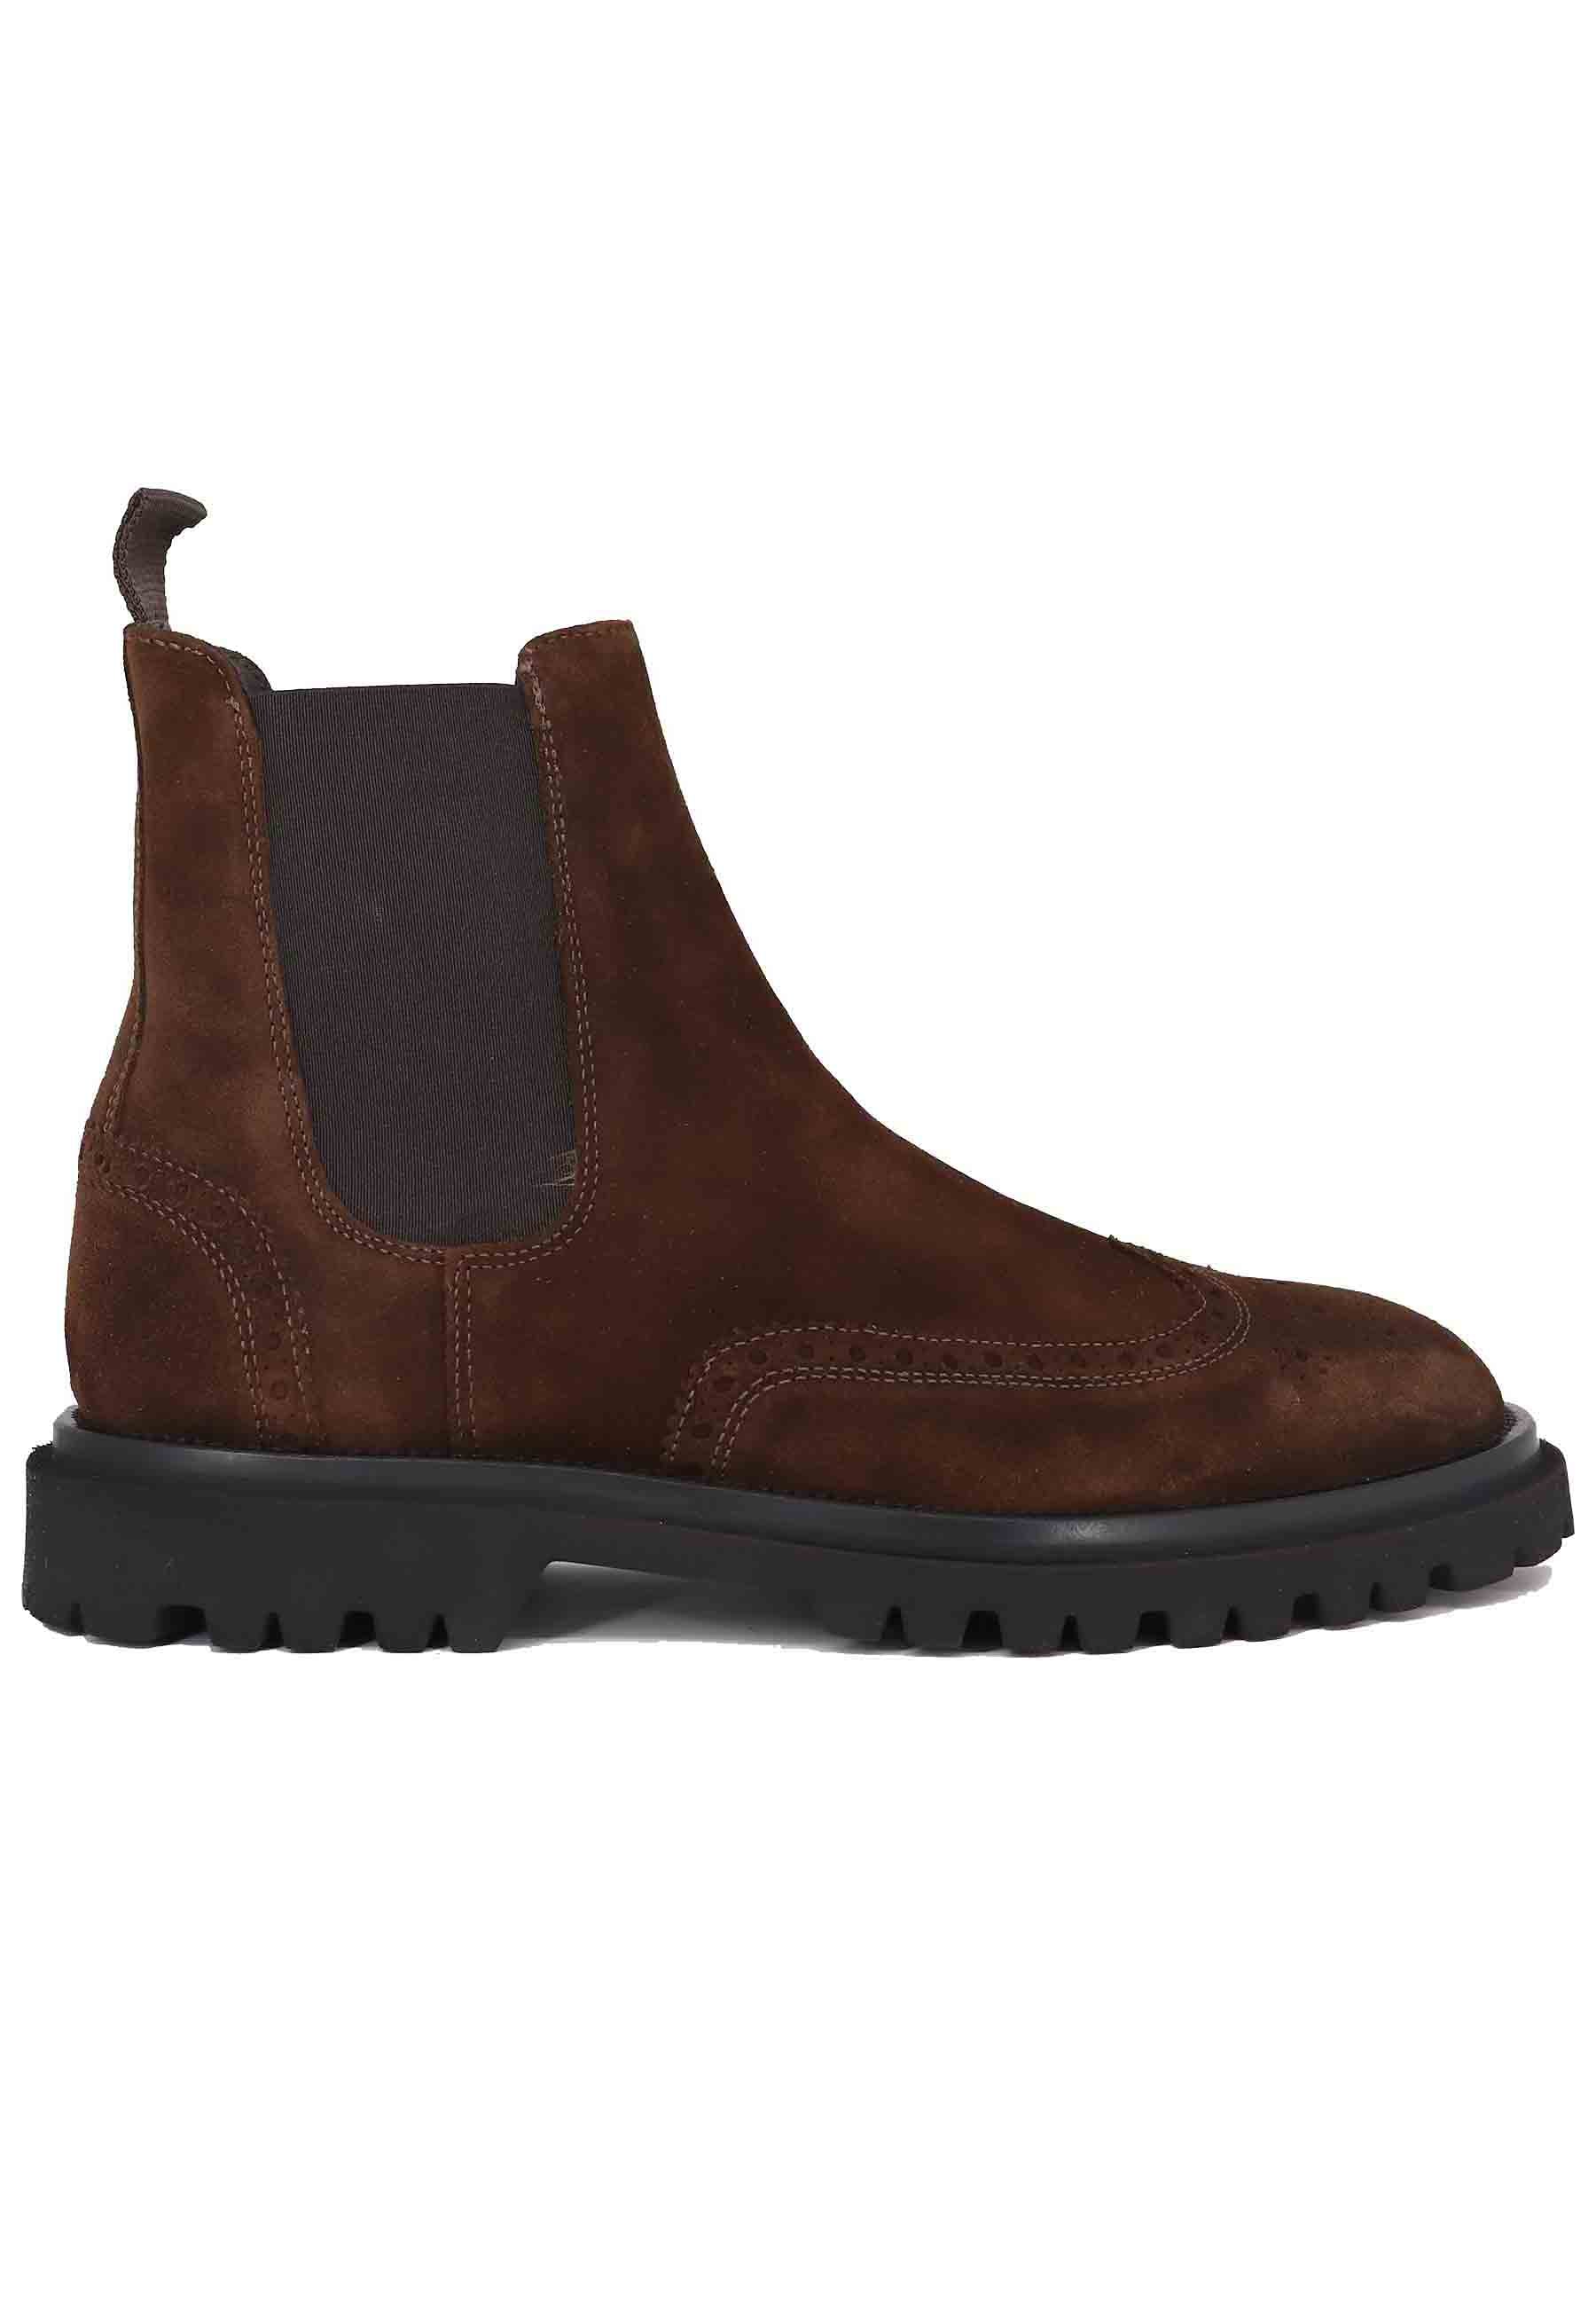 Men's ankle boots in dark brown suede with lug sole and stitching